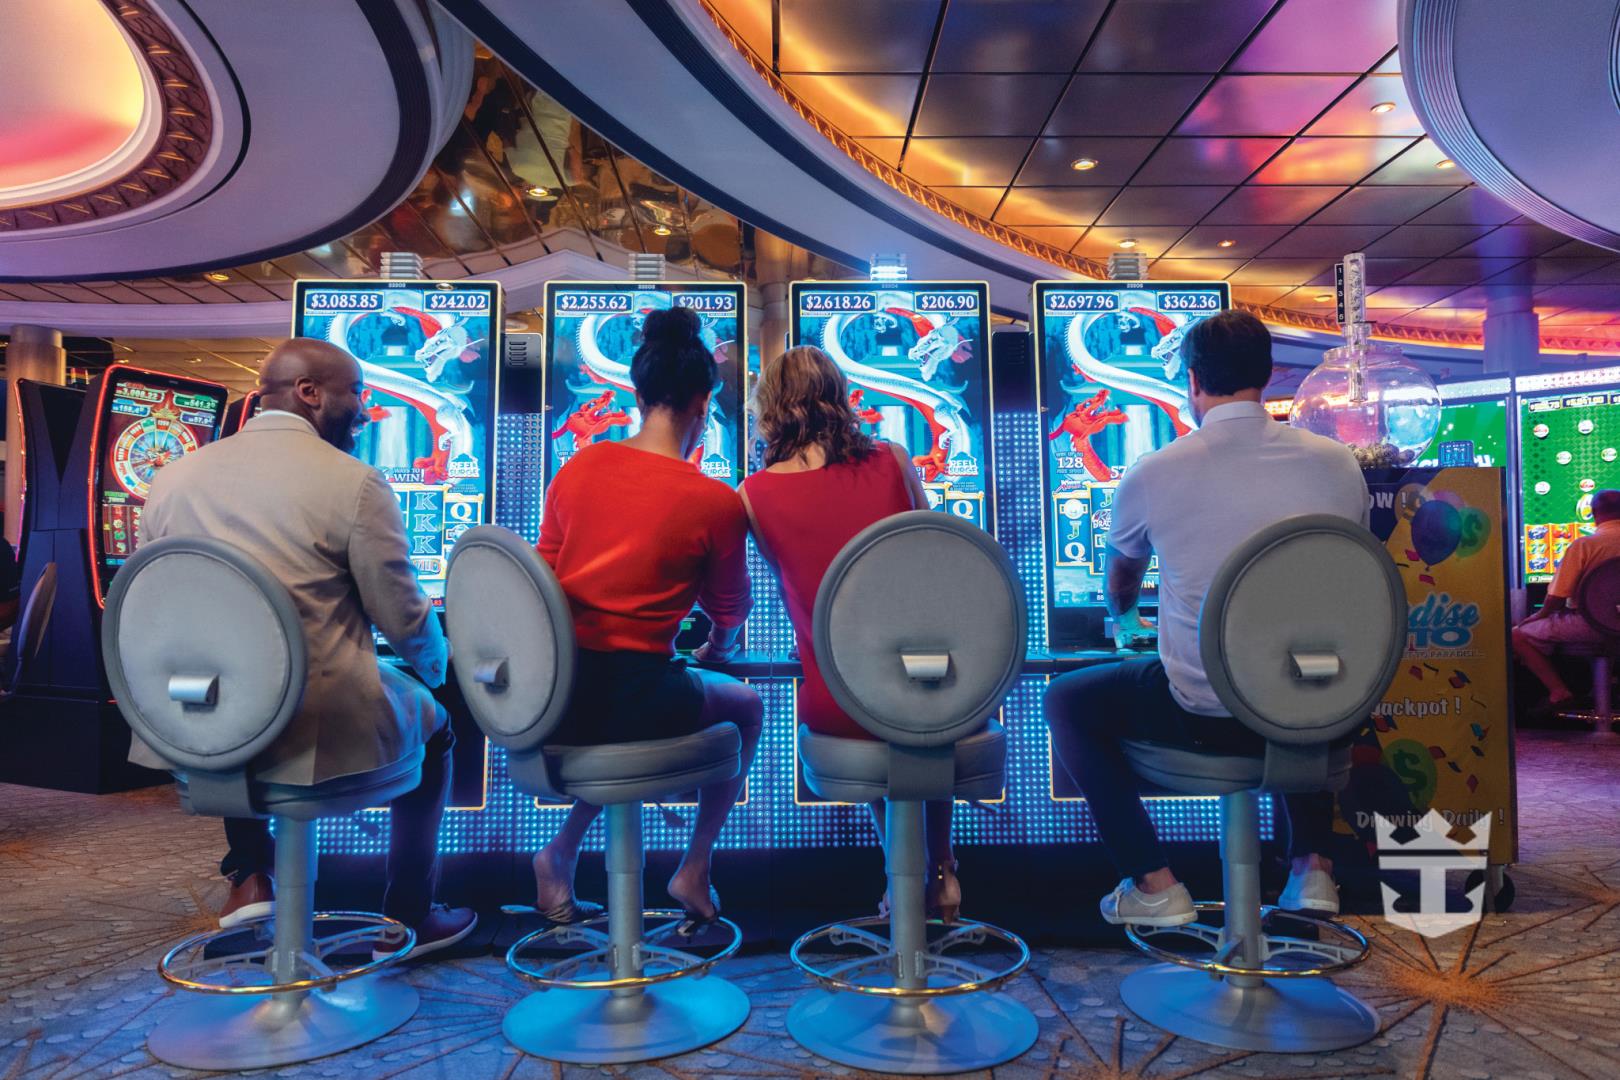 View of two couples playing with slot machines in the River Dragon Casino - Photo Credit: F Fernandez